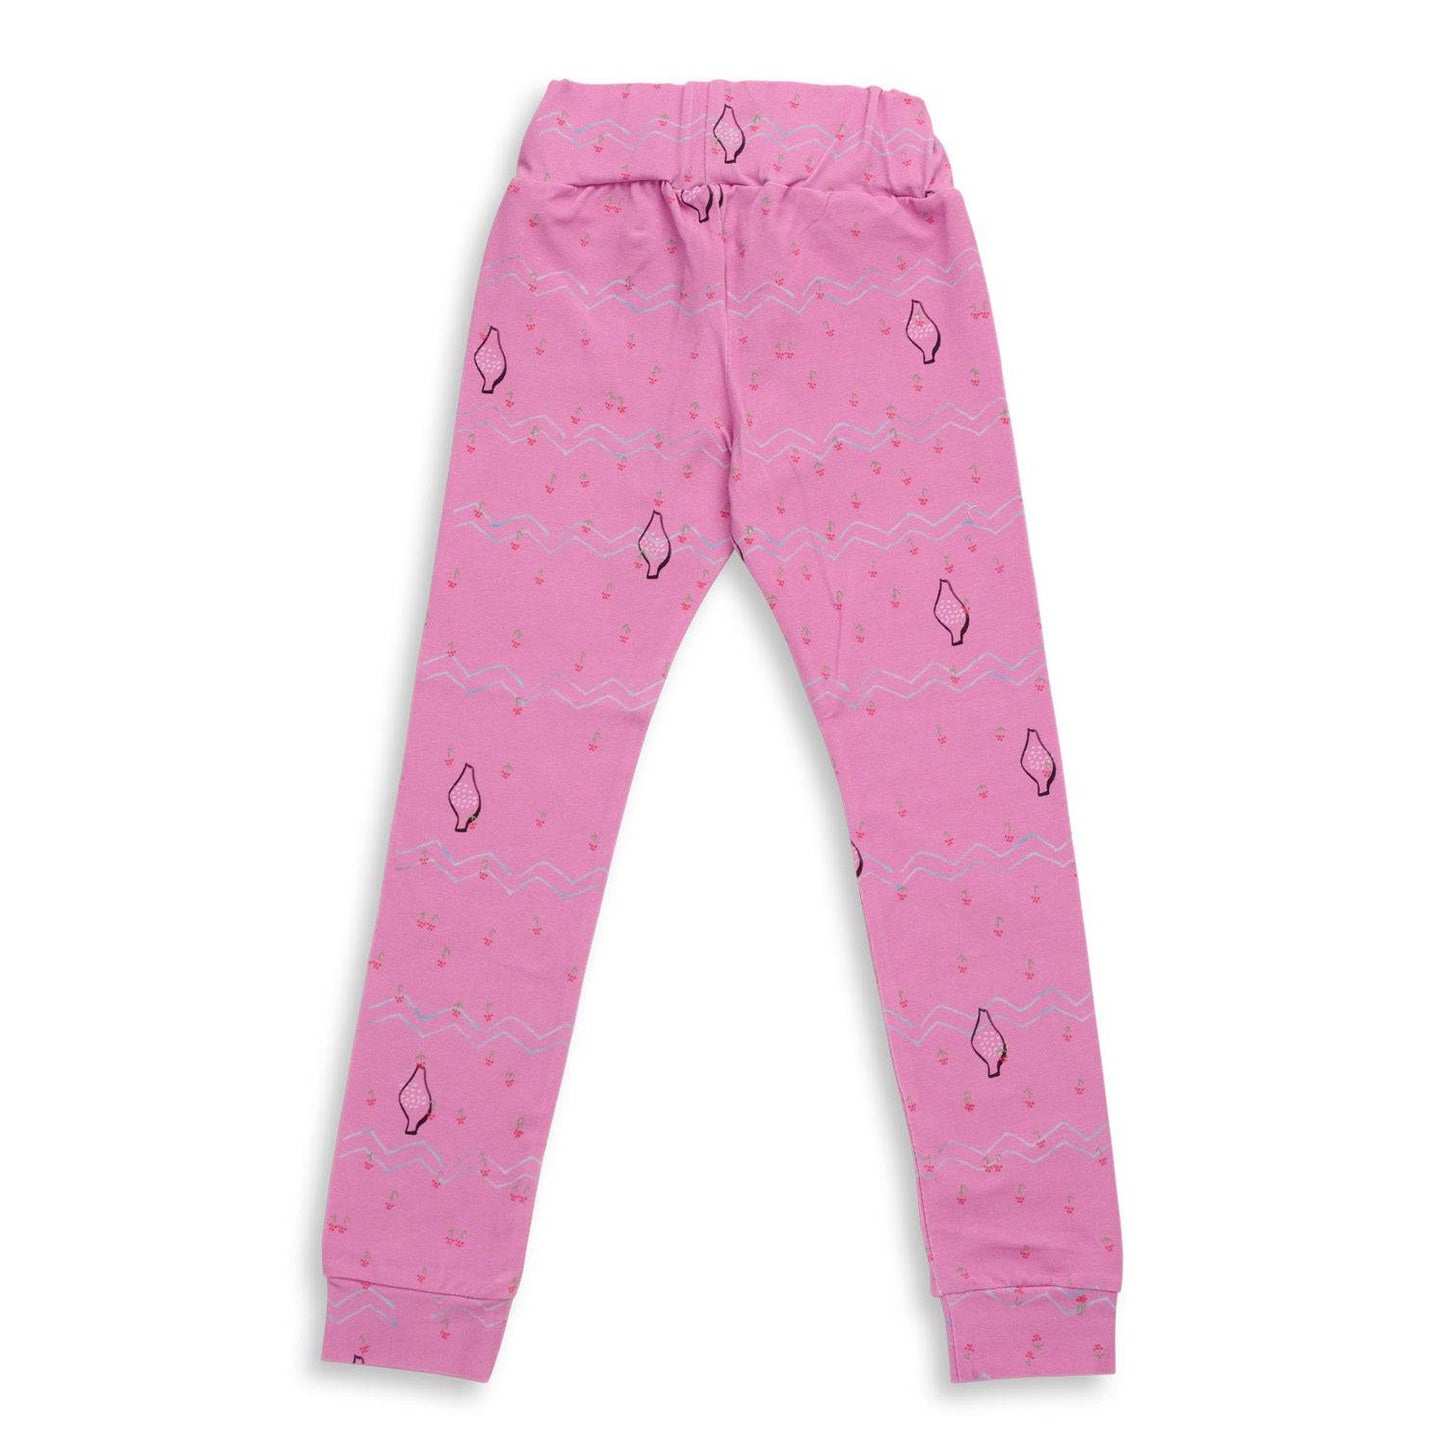 The Pink Dragonfly Leggings - CooCootales